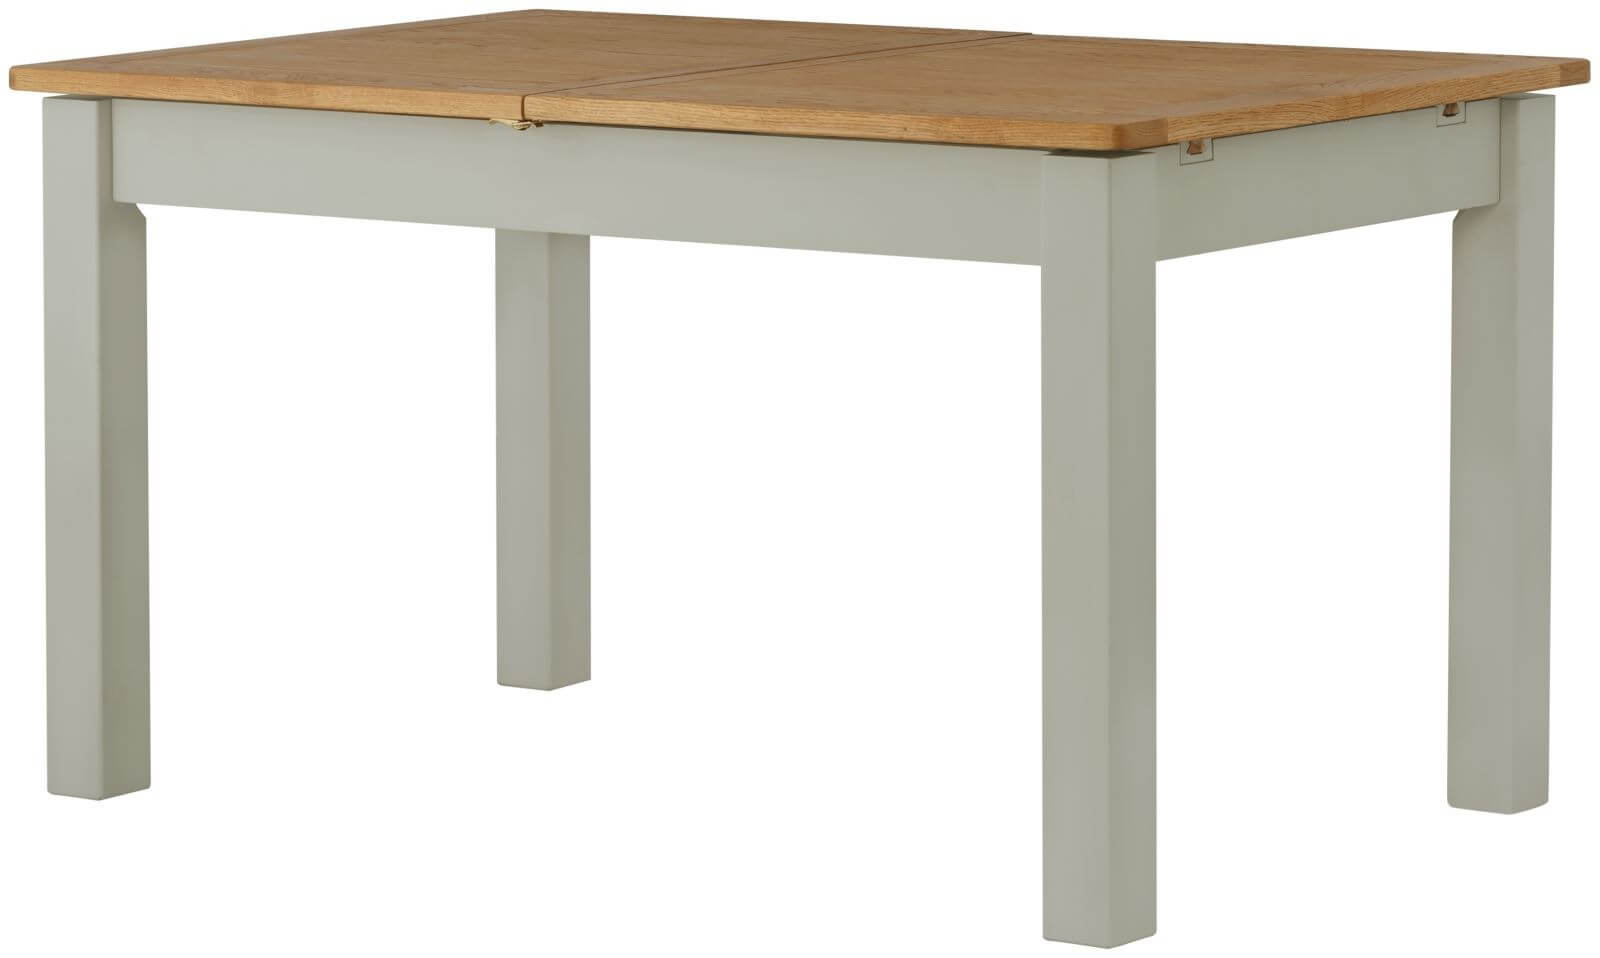 Showing image for Seattle extending dining table - stone